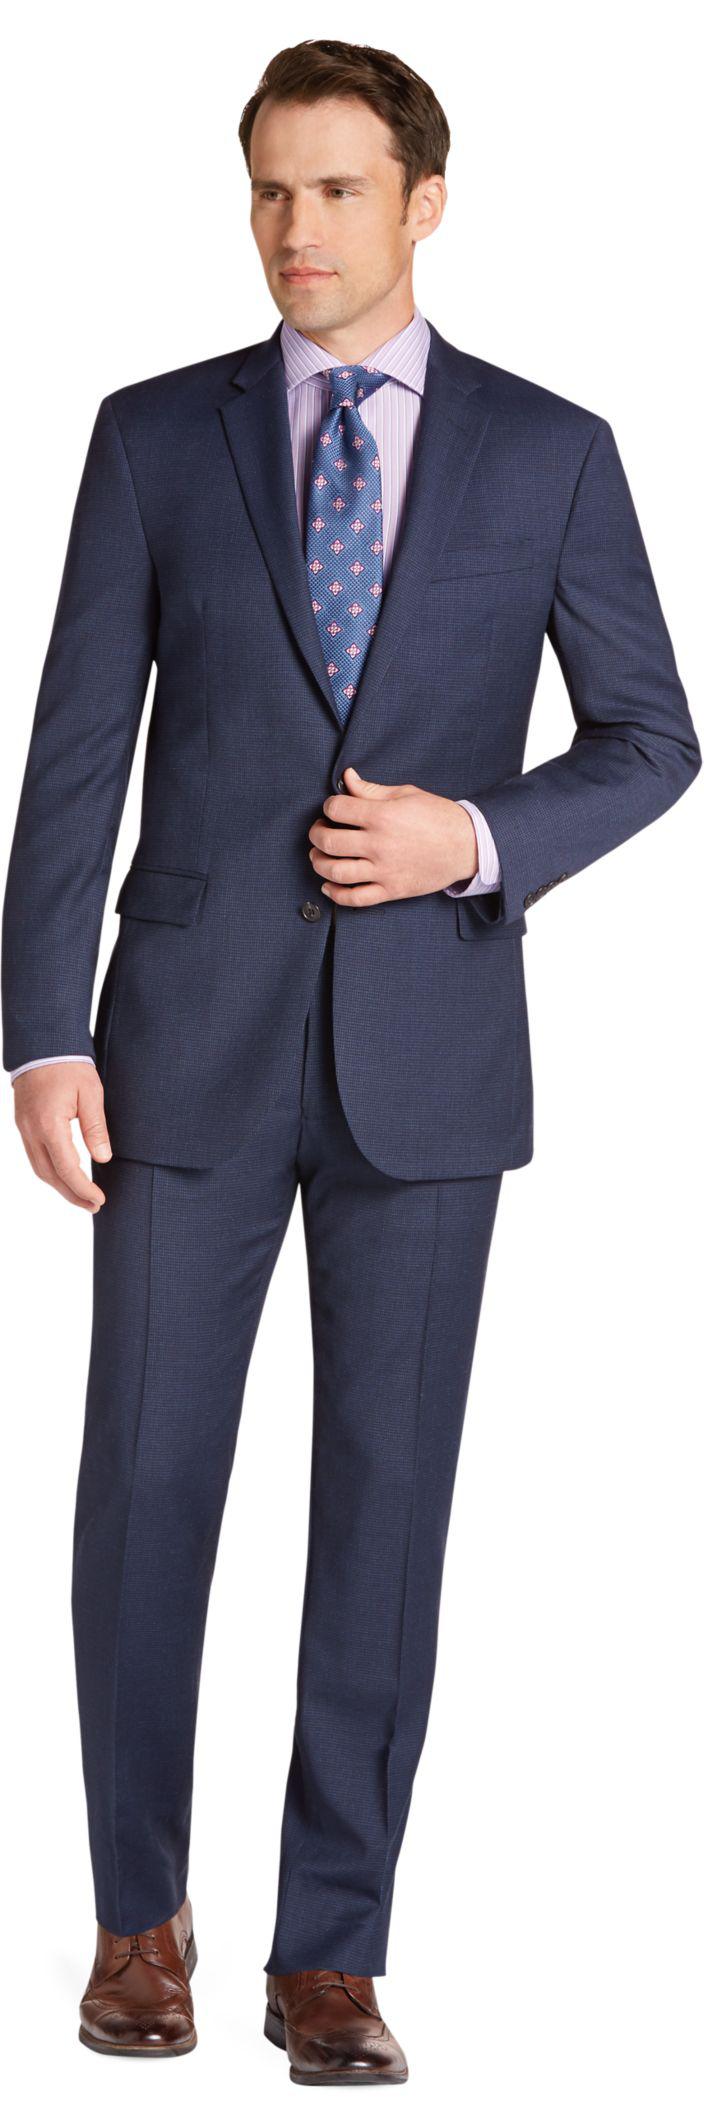 Lyst - Jos. A. Bank 1905 Collection Slim Fit Mini Check Suit in Blue ...